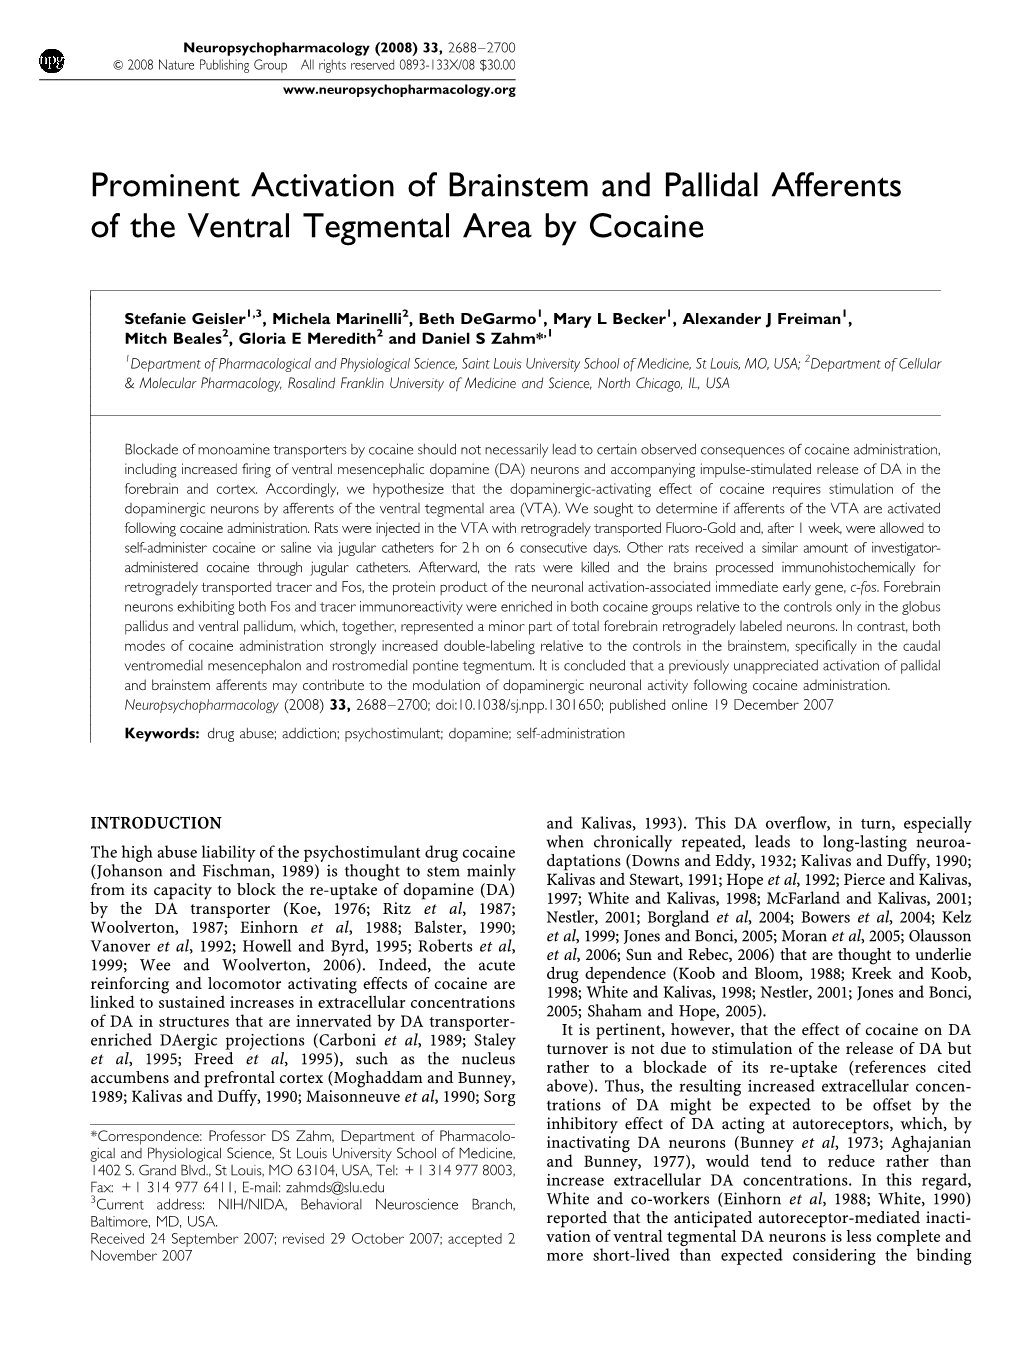 Prominent Activation of Brainstem and Pallidal Afferents of the Ventral Tegmental Area by Cocaine